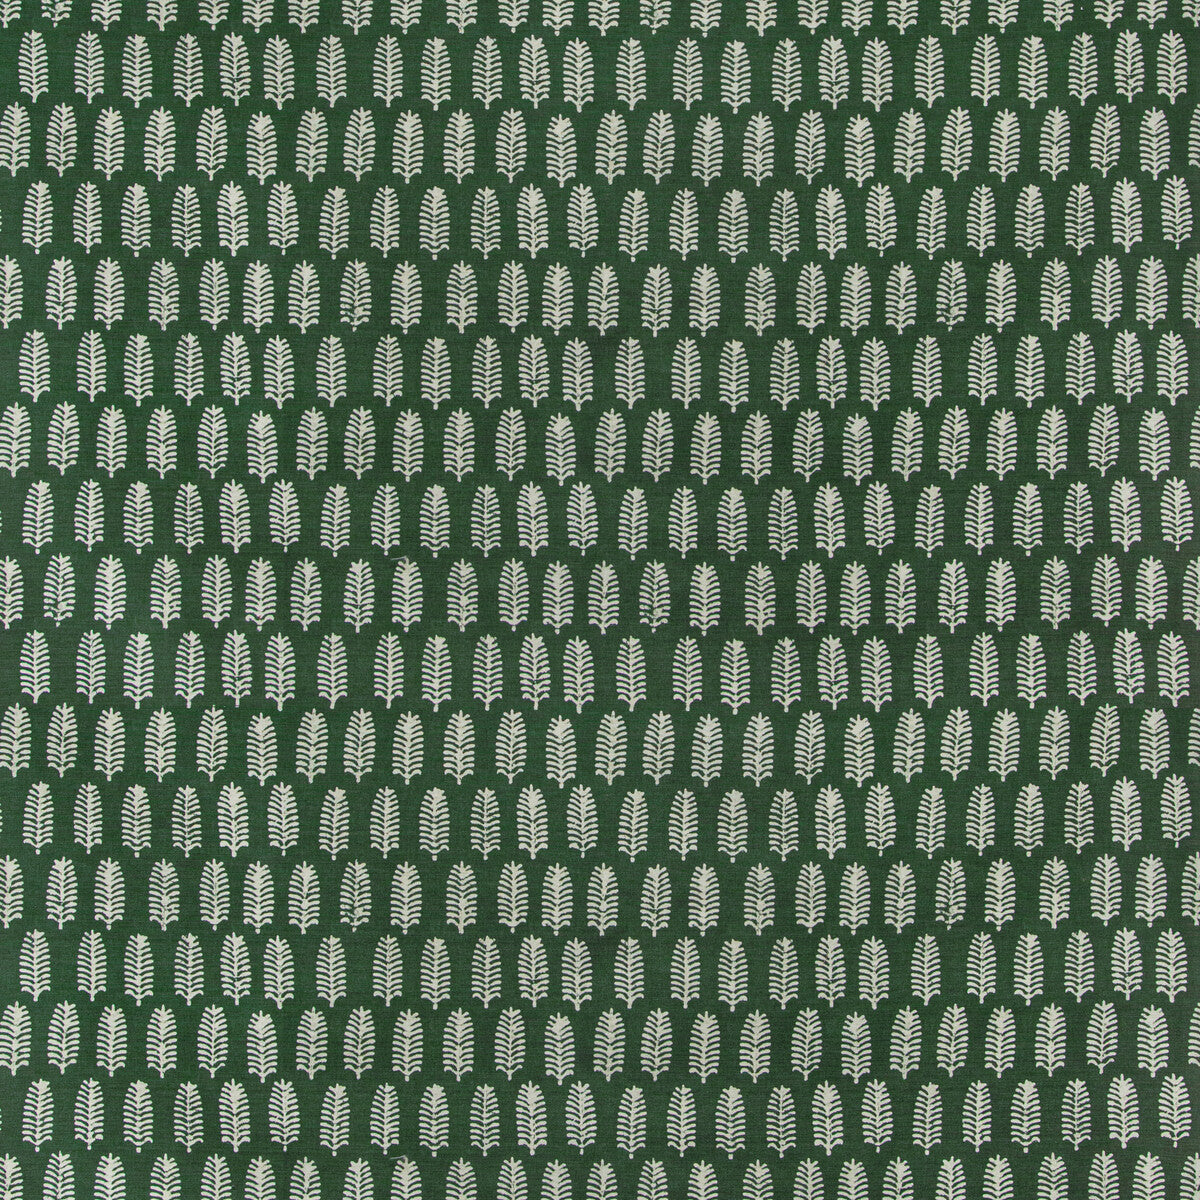 Palmier fabric in forest green color - pattern 2019127.31.0 - by Lee Jofa